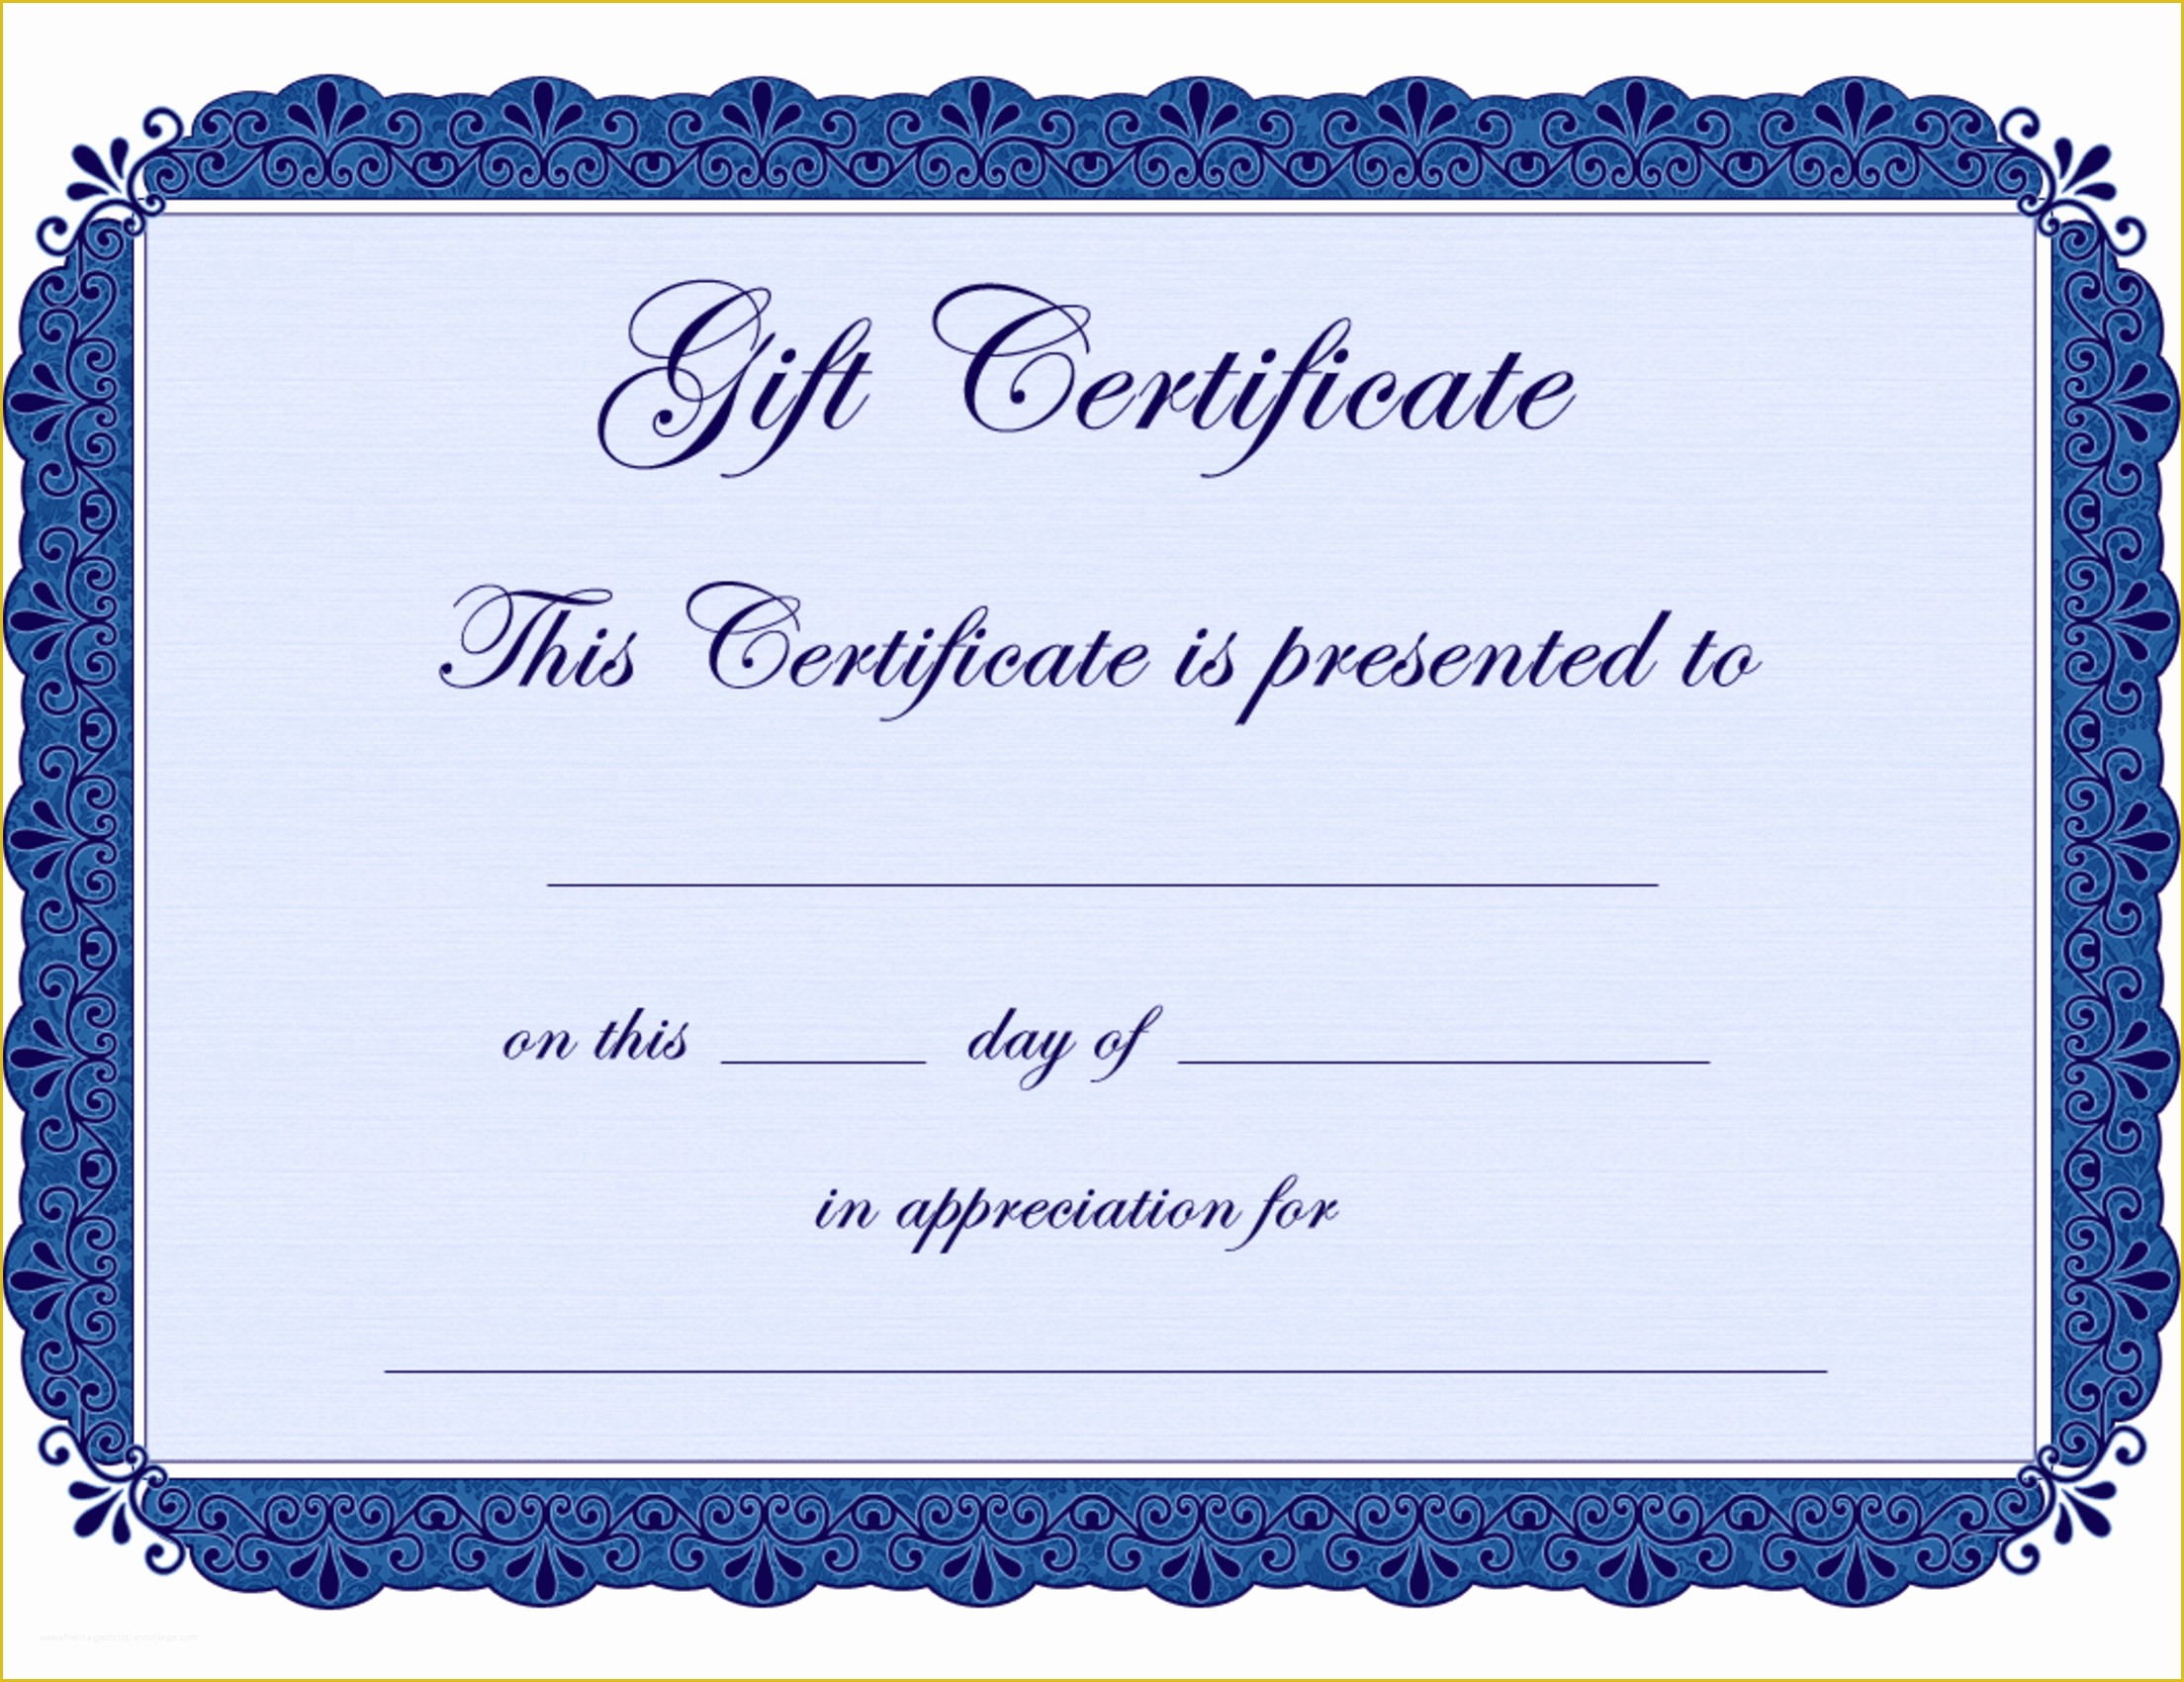 Gift Certificate Template Word Free Download Of Gift Certificate Templates Microsoft Fice Templates